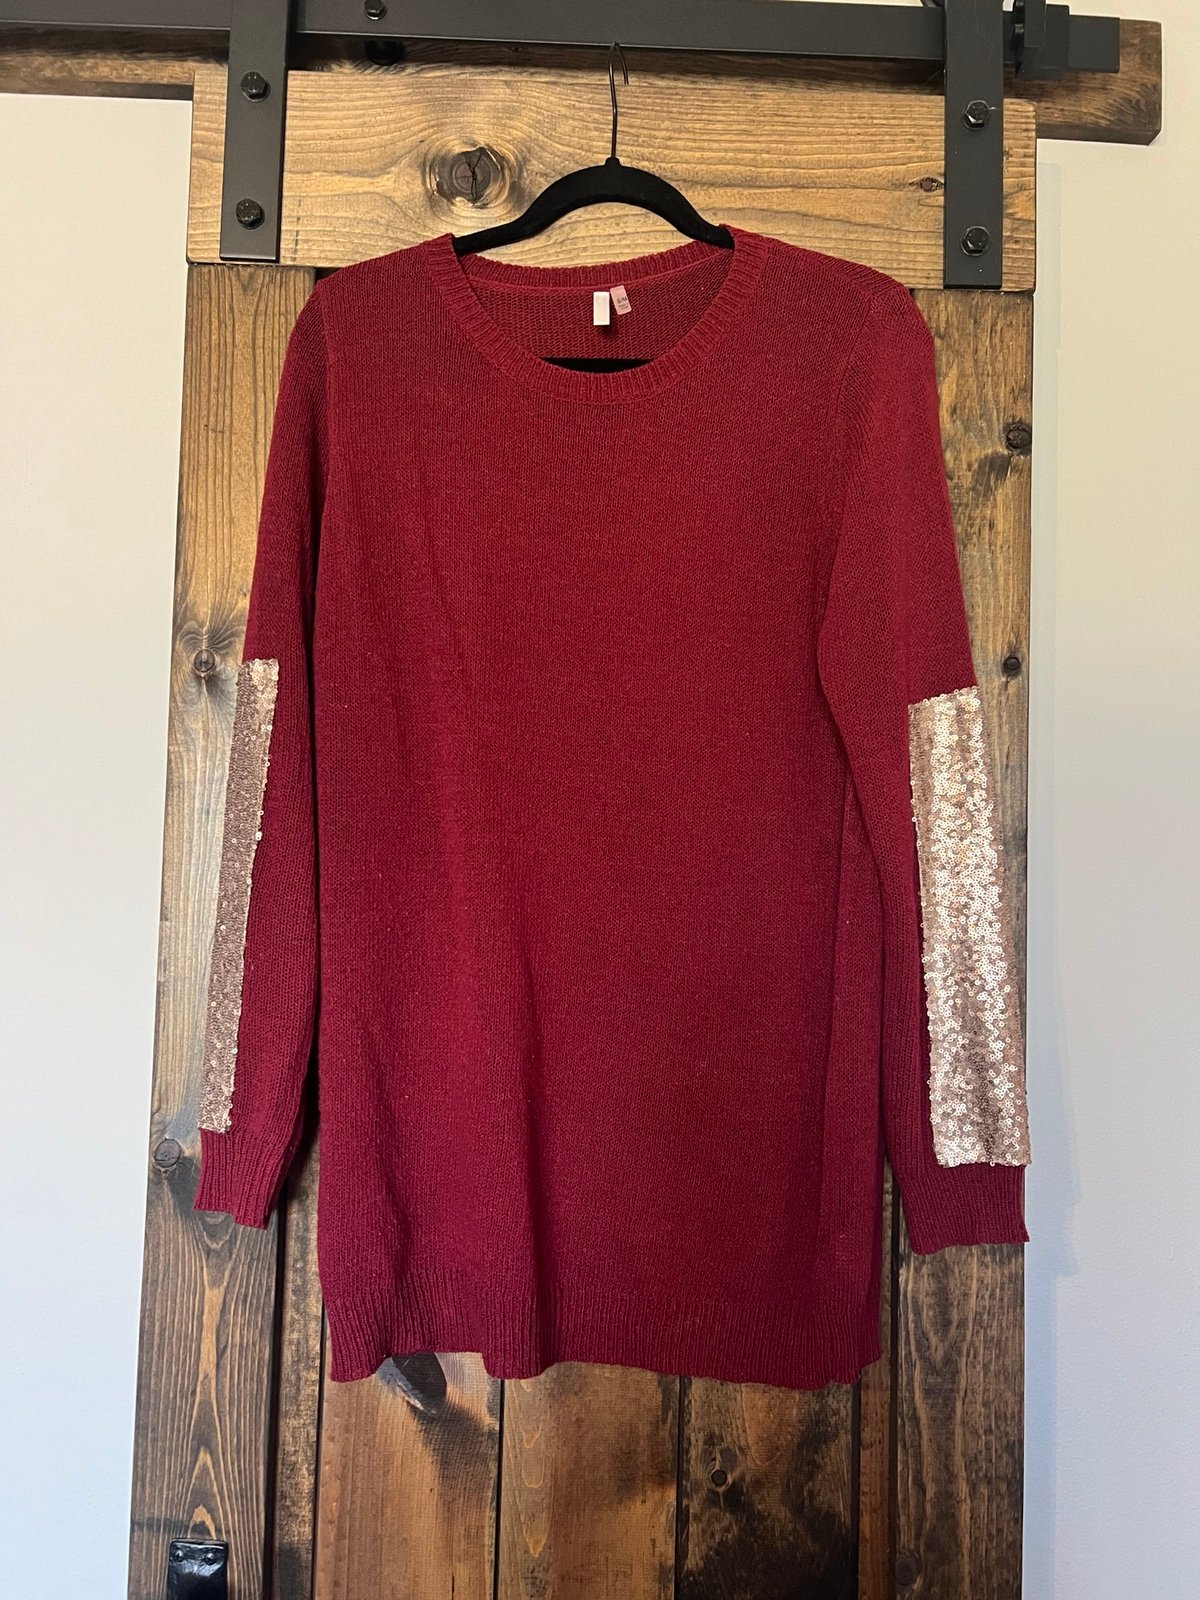 Pink Blush maternity maroon sweater with gold sleeve accents - size S/M dwnU3HNyB